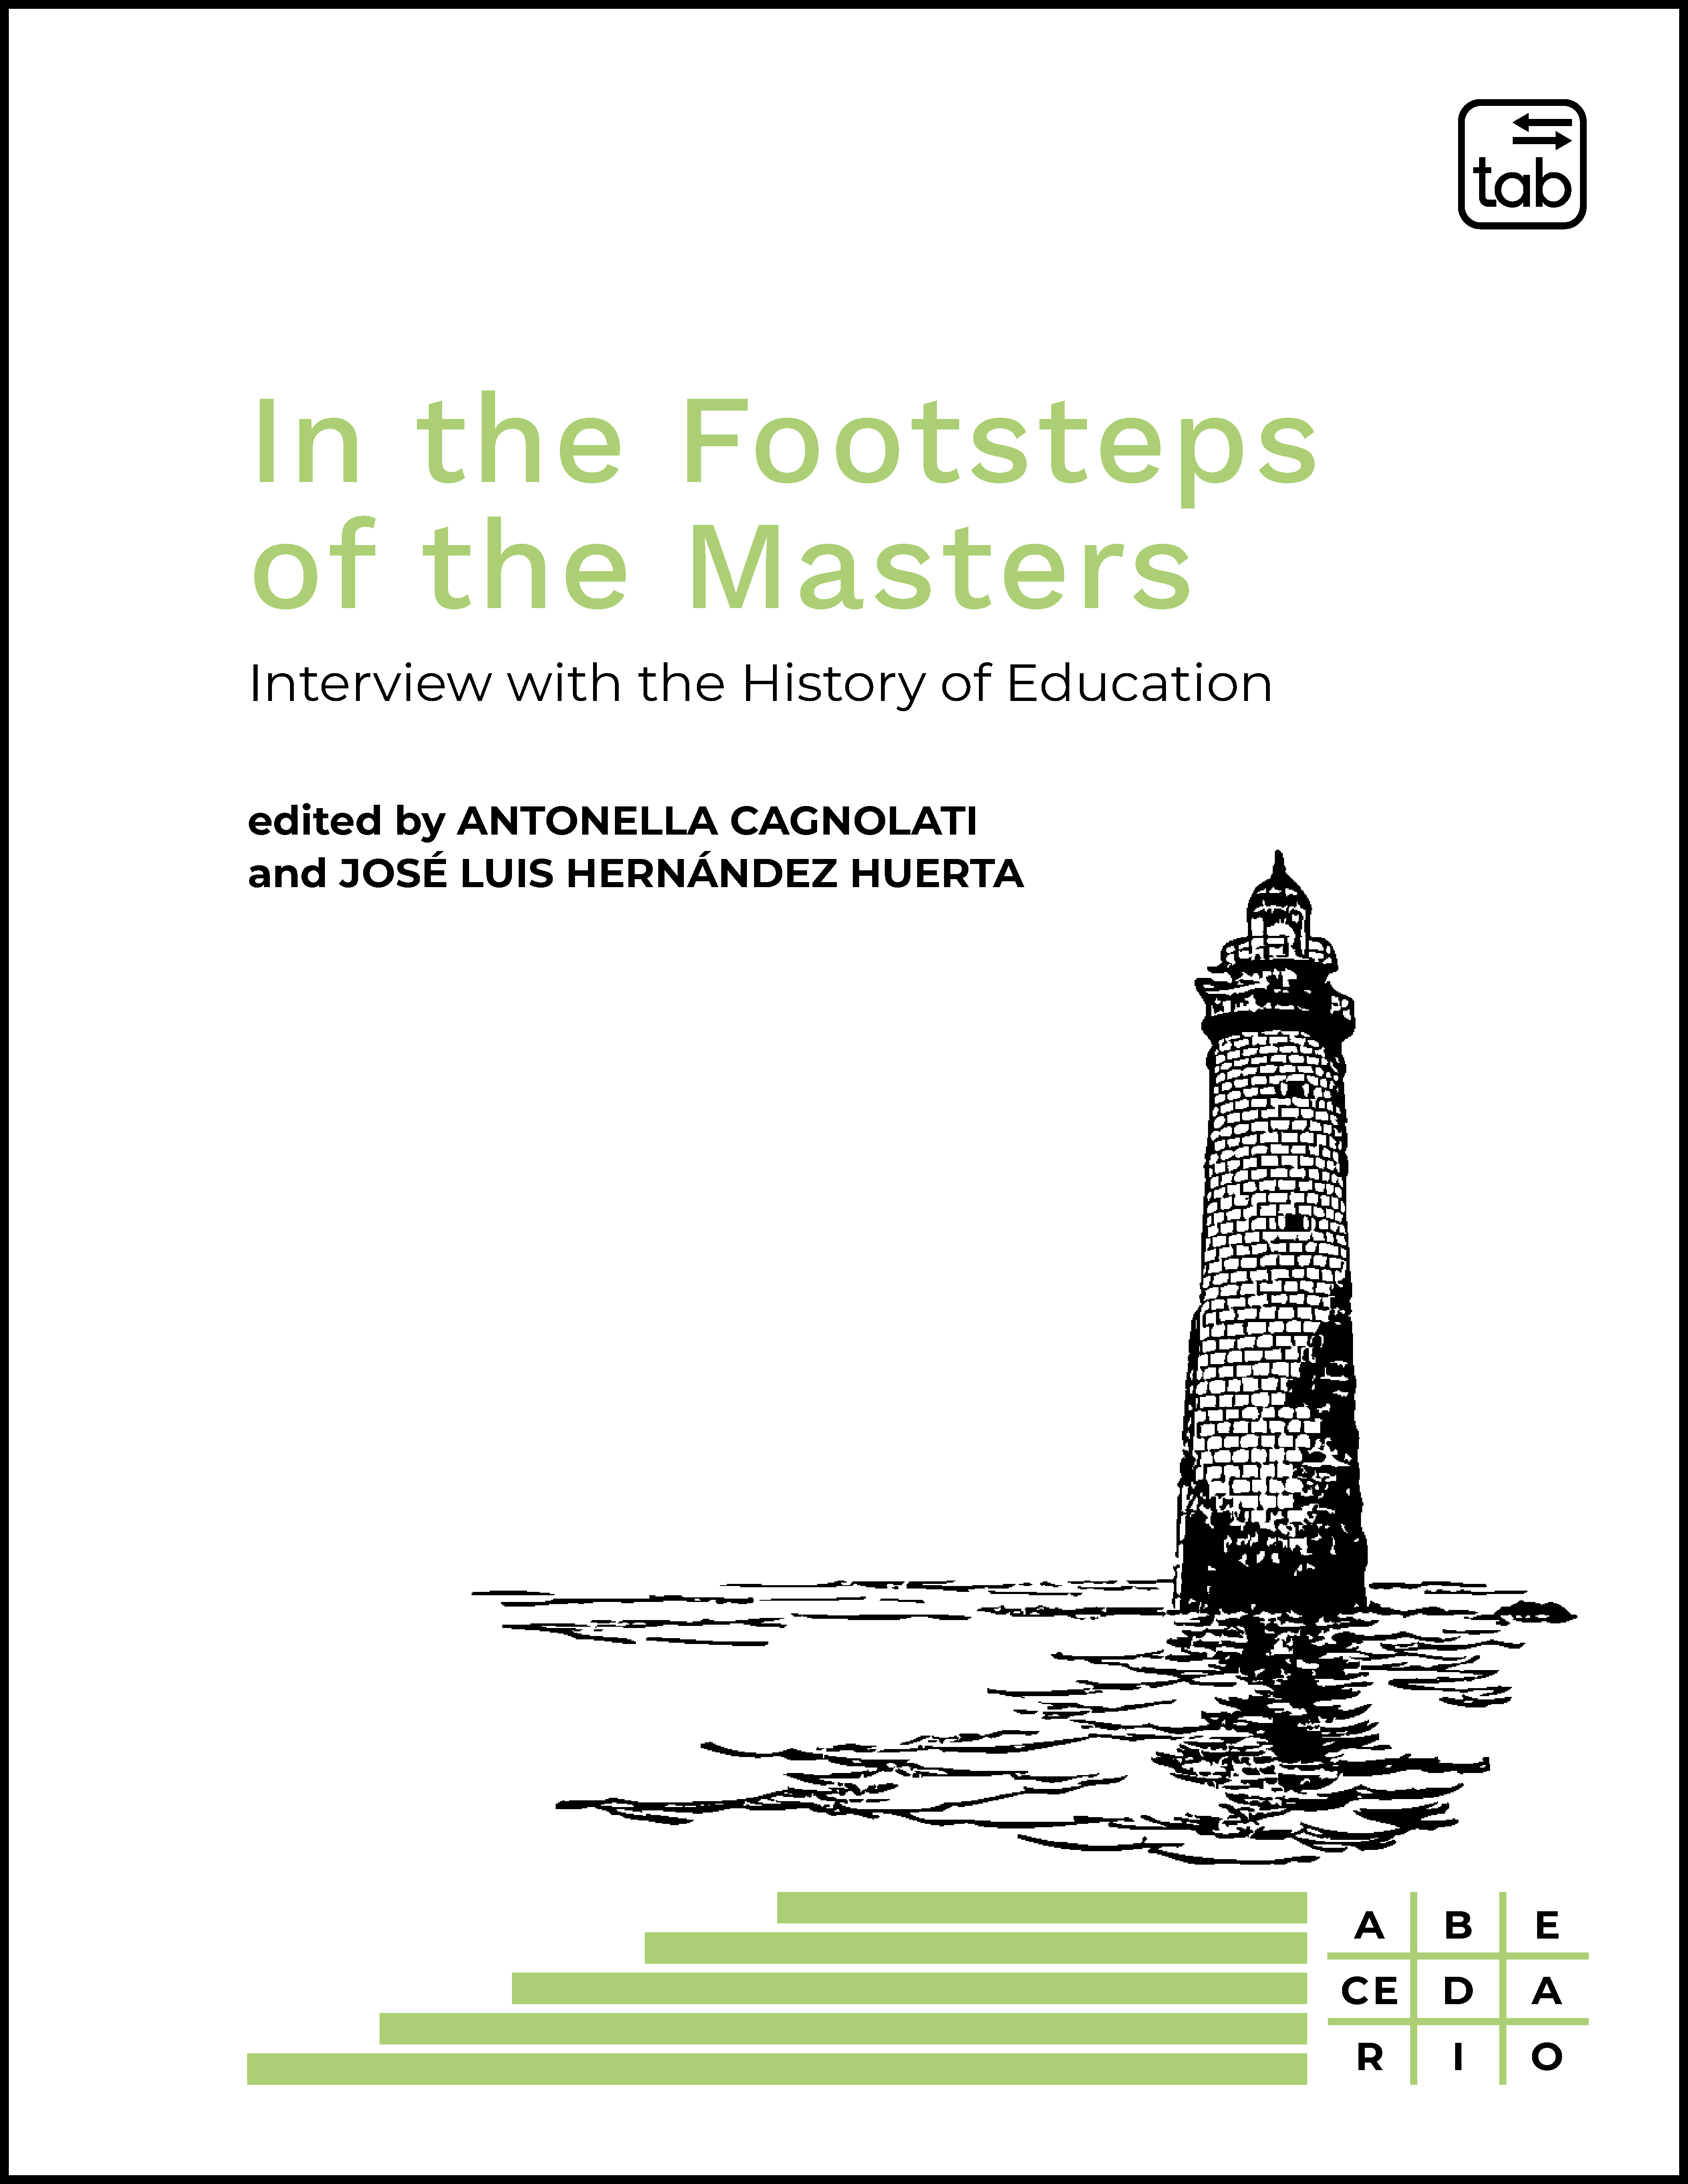 In the Footsteps of the Masters